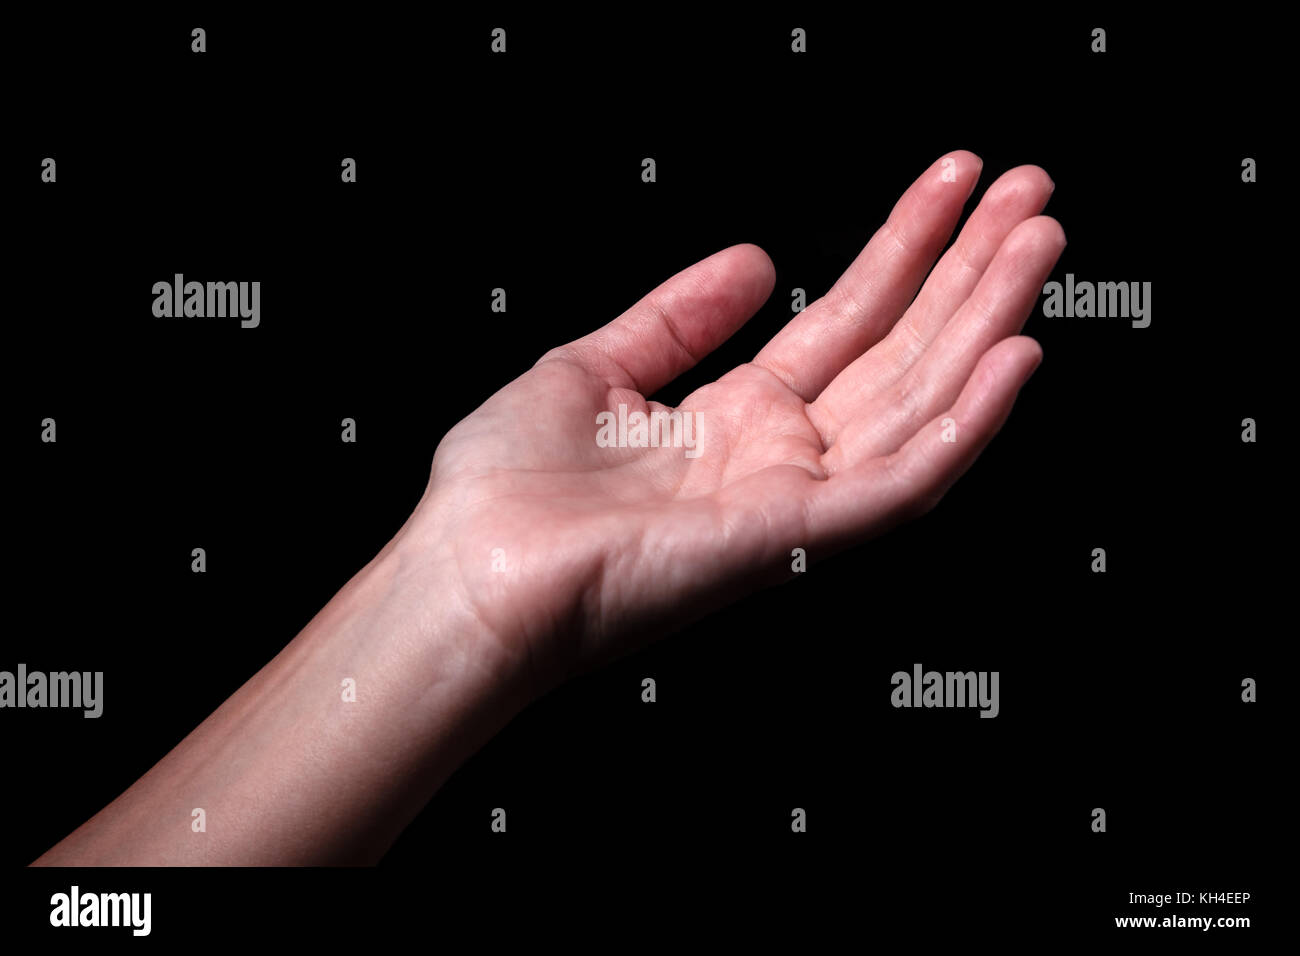 Female hand reaching with palms up. Concept for begging, asking, needing, salvation, rescue, friendship, guidance, help, helping. Black background. Stock Photo